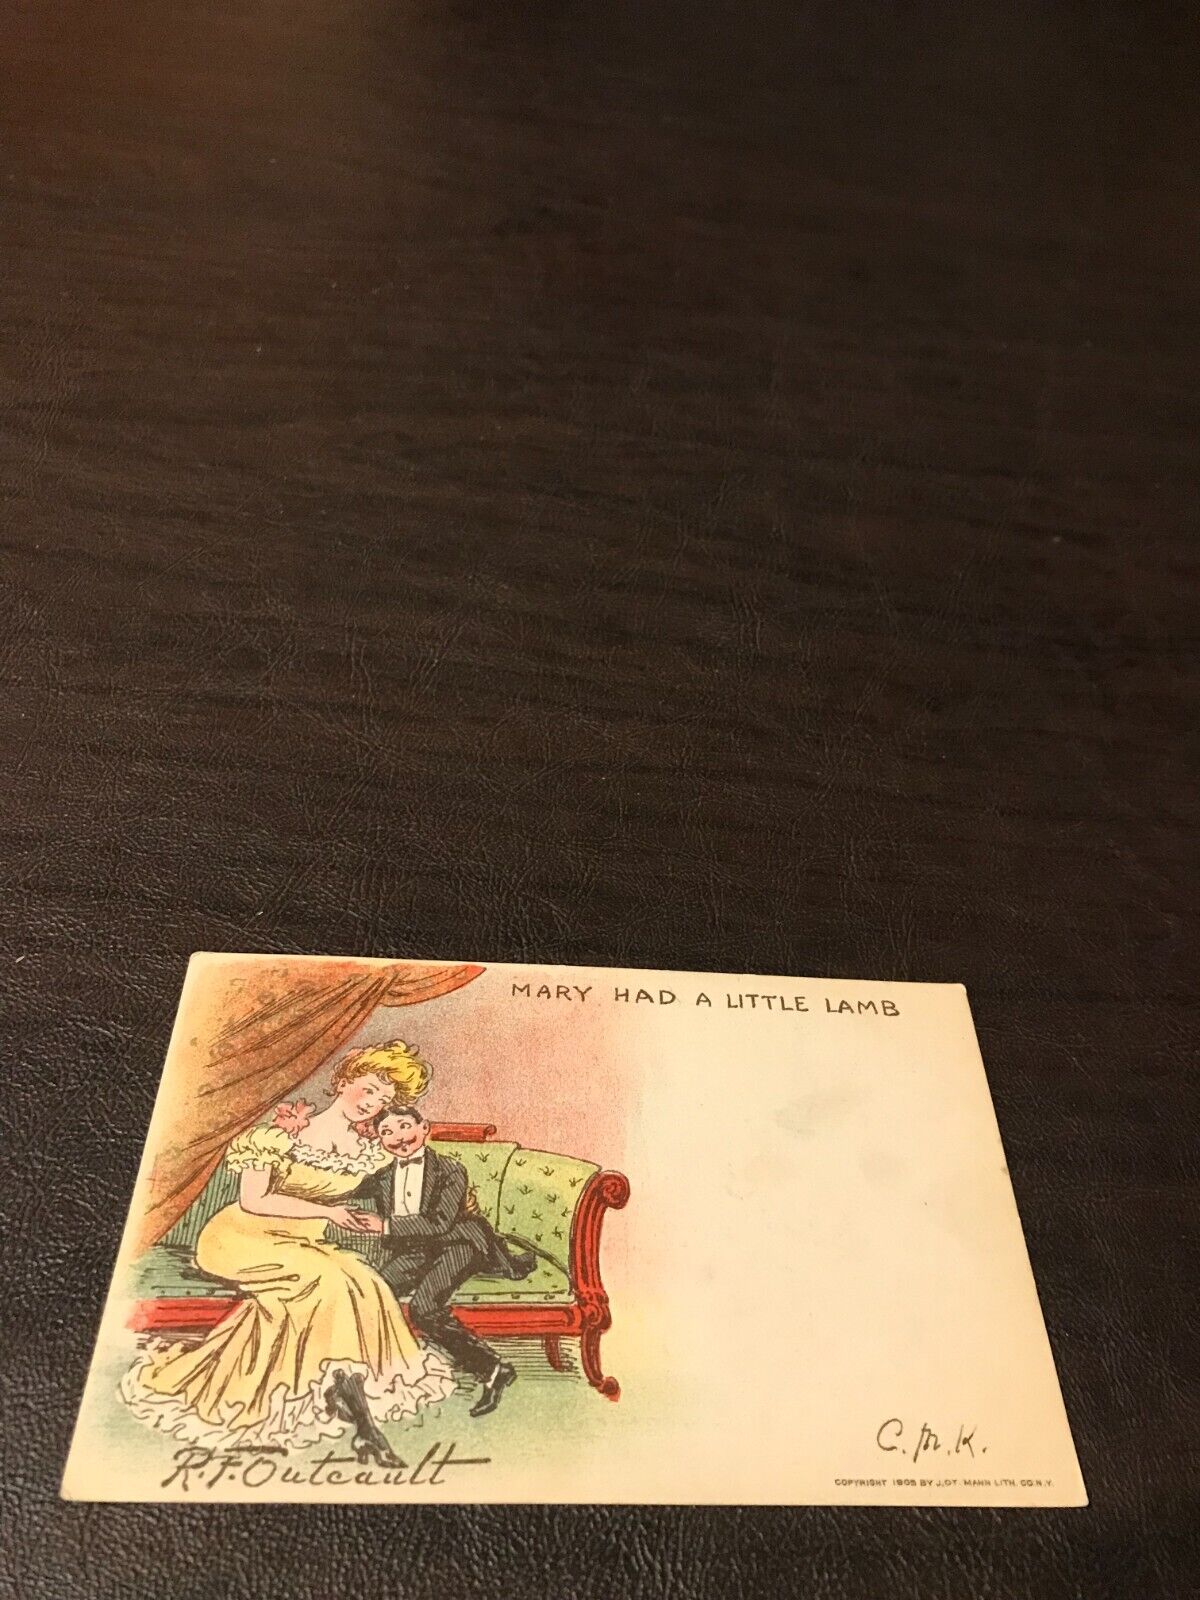 EARLY 1906 - HUMOR - POSTED POSTCARD - MARY HAD A LITTLE LAMB